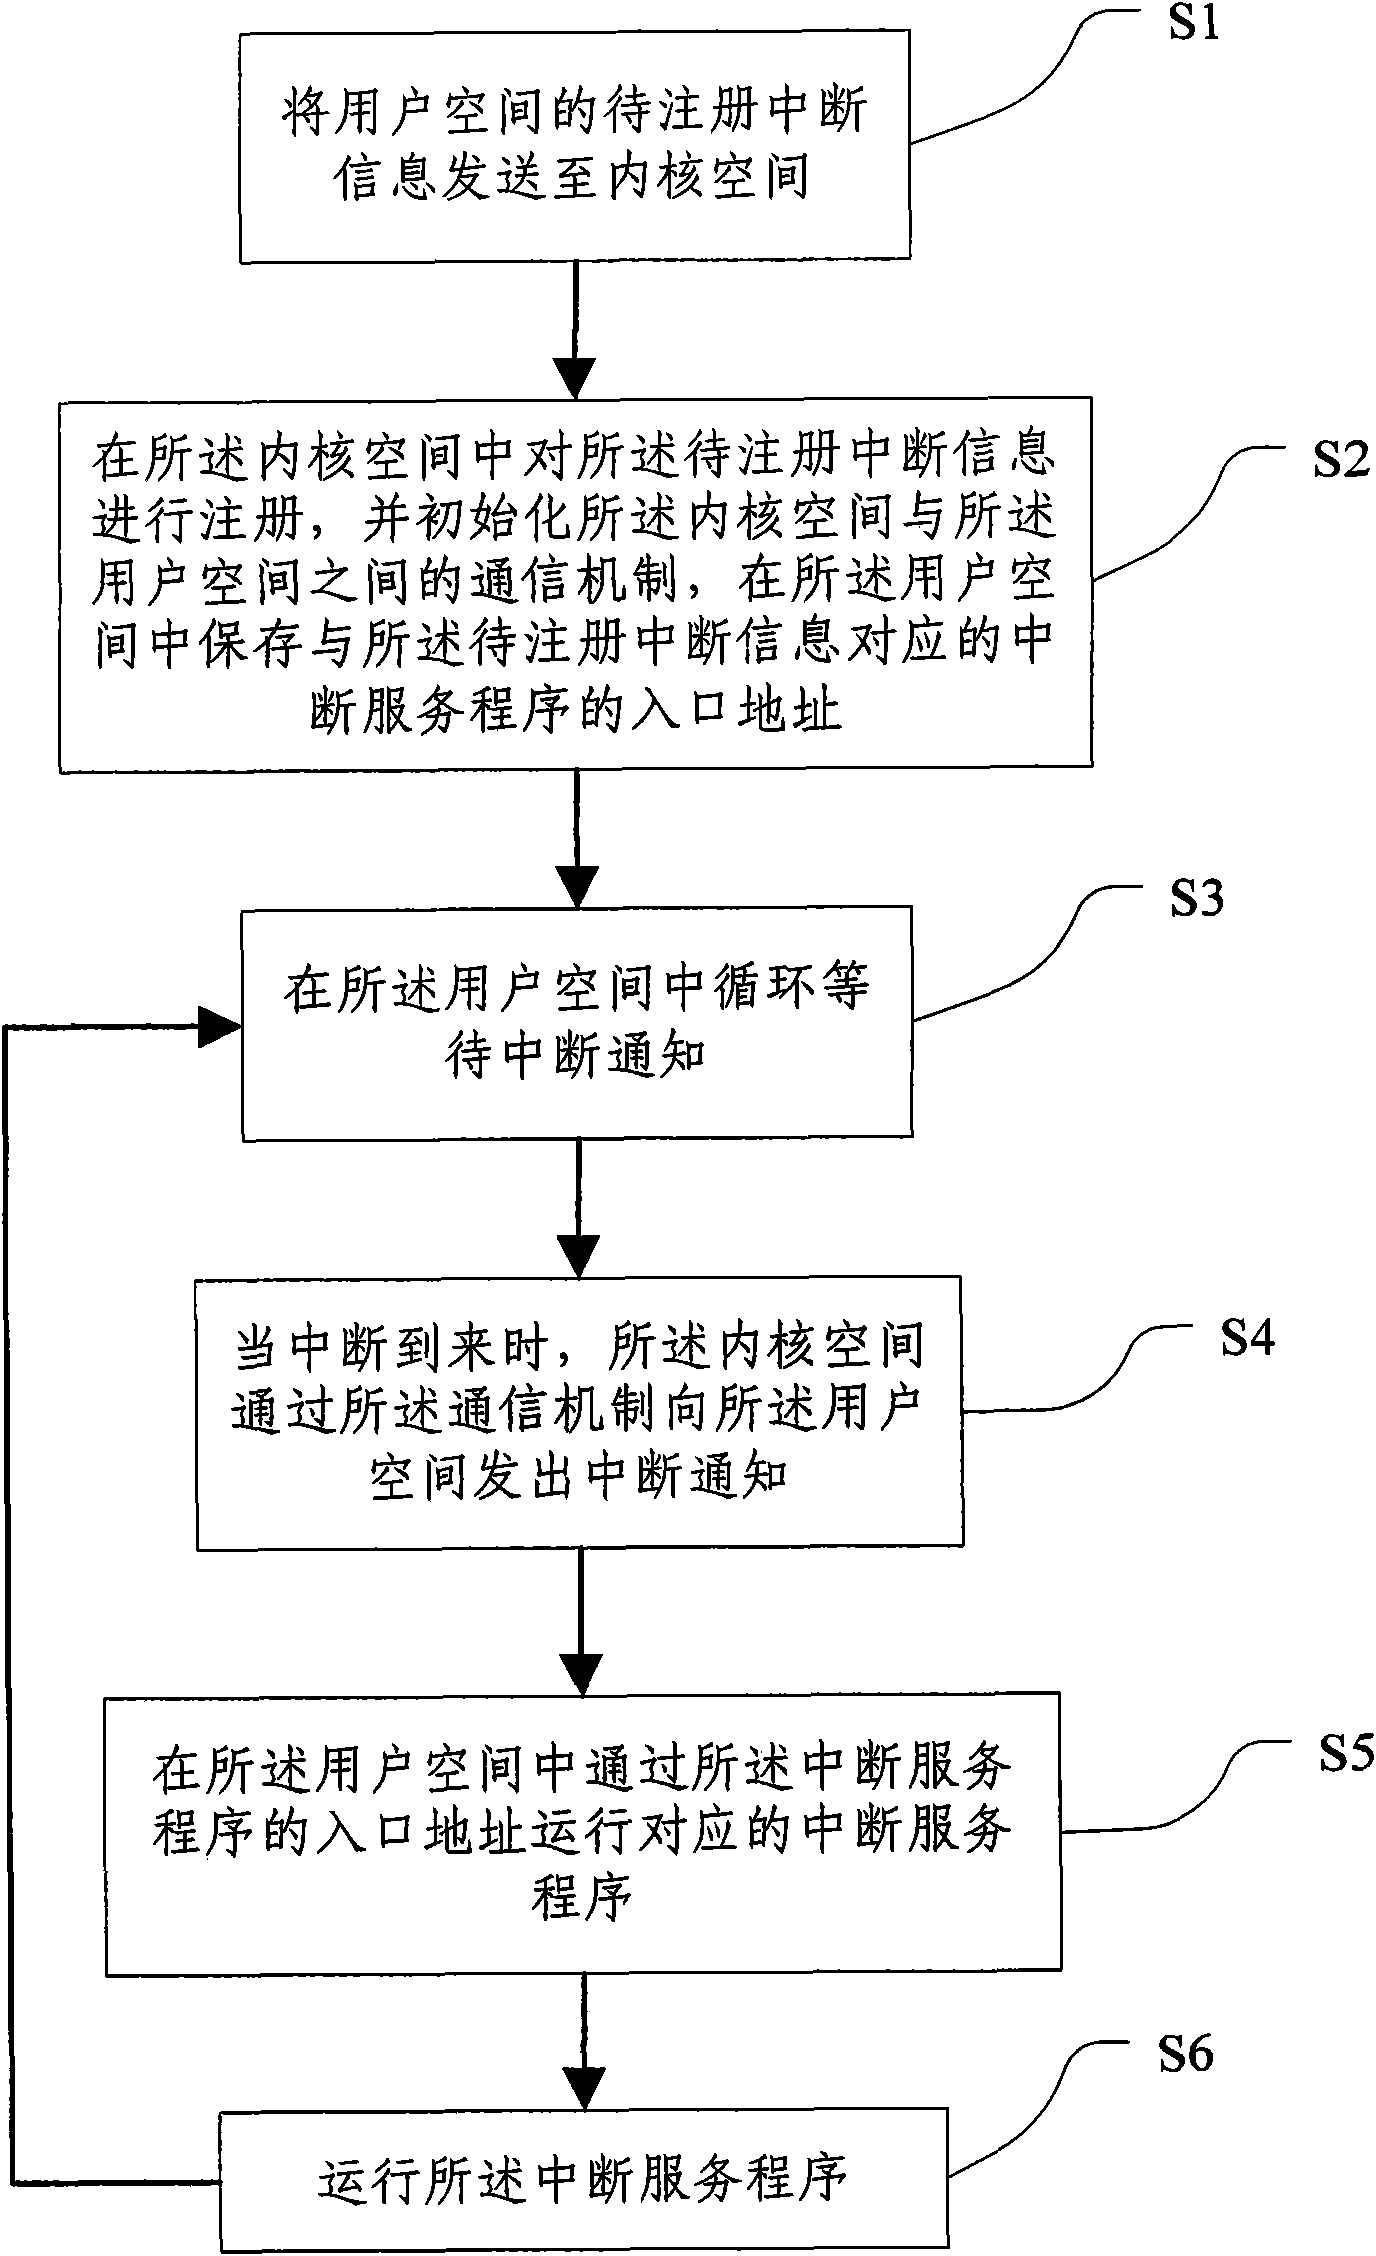 Method and system for running interrupt service in user space